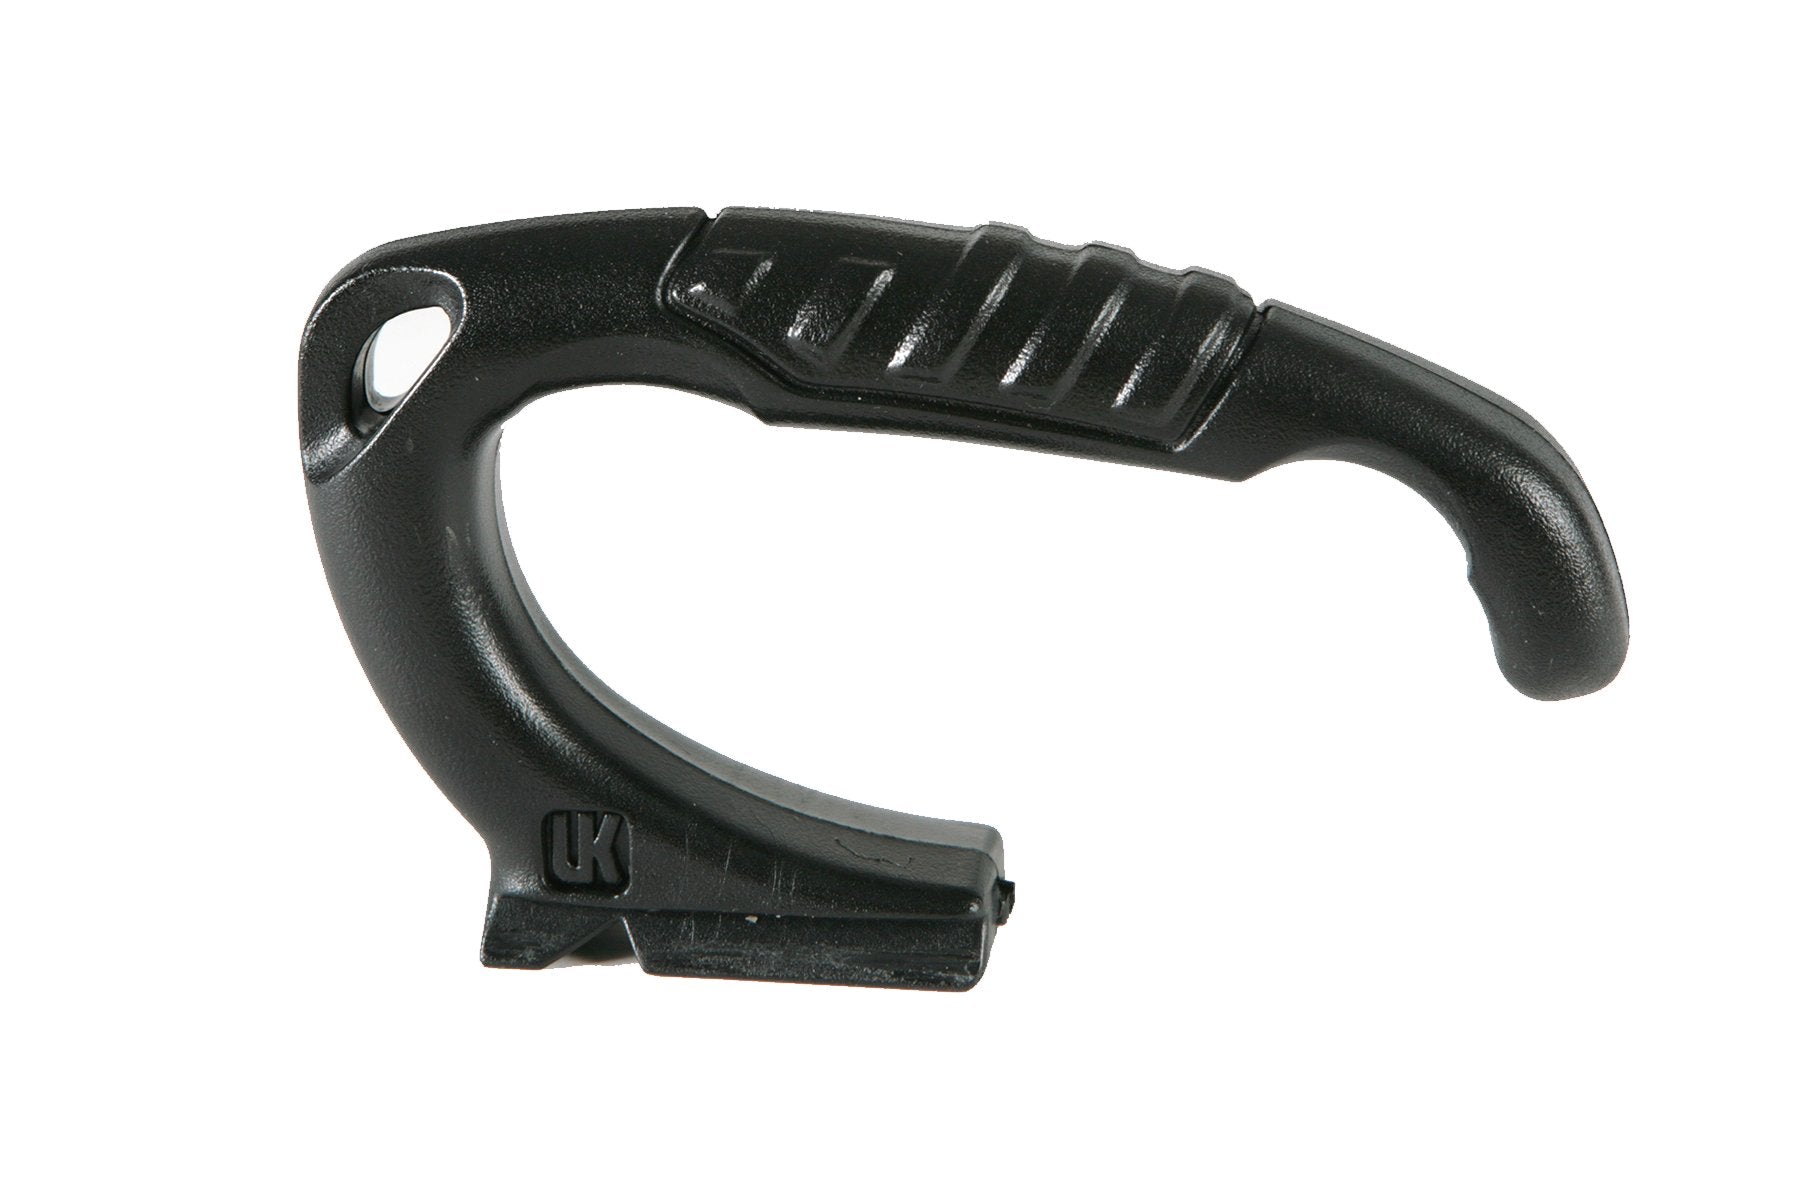 Underwater Kinetics Lantern Grip (Replacement grip for Light Cannon eLED L1)